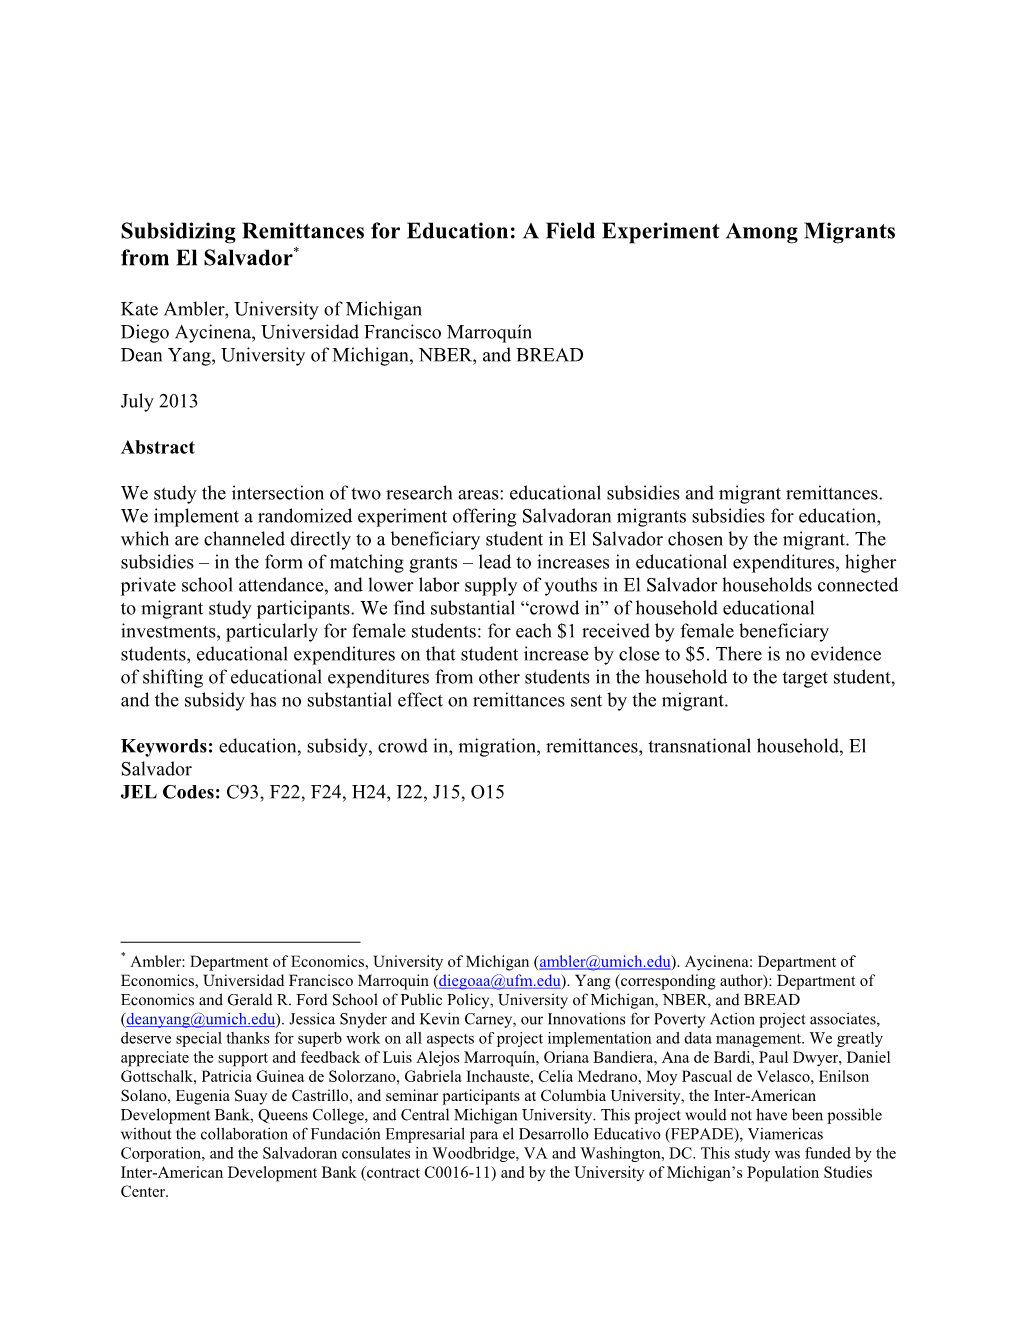 Subsidizing Remittances for Education: a Field Experiment Among Migrants from El Salvador*